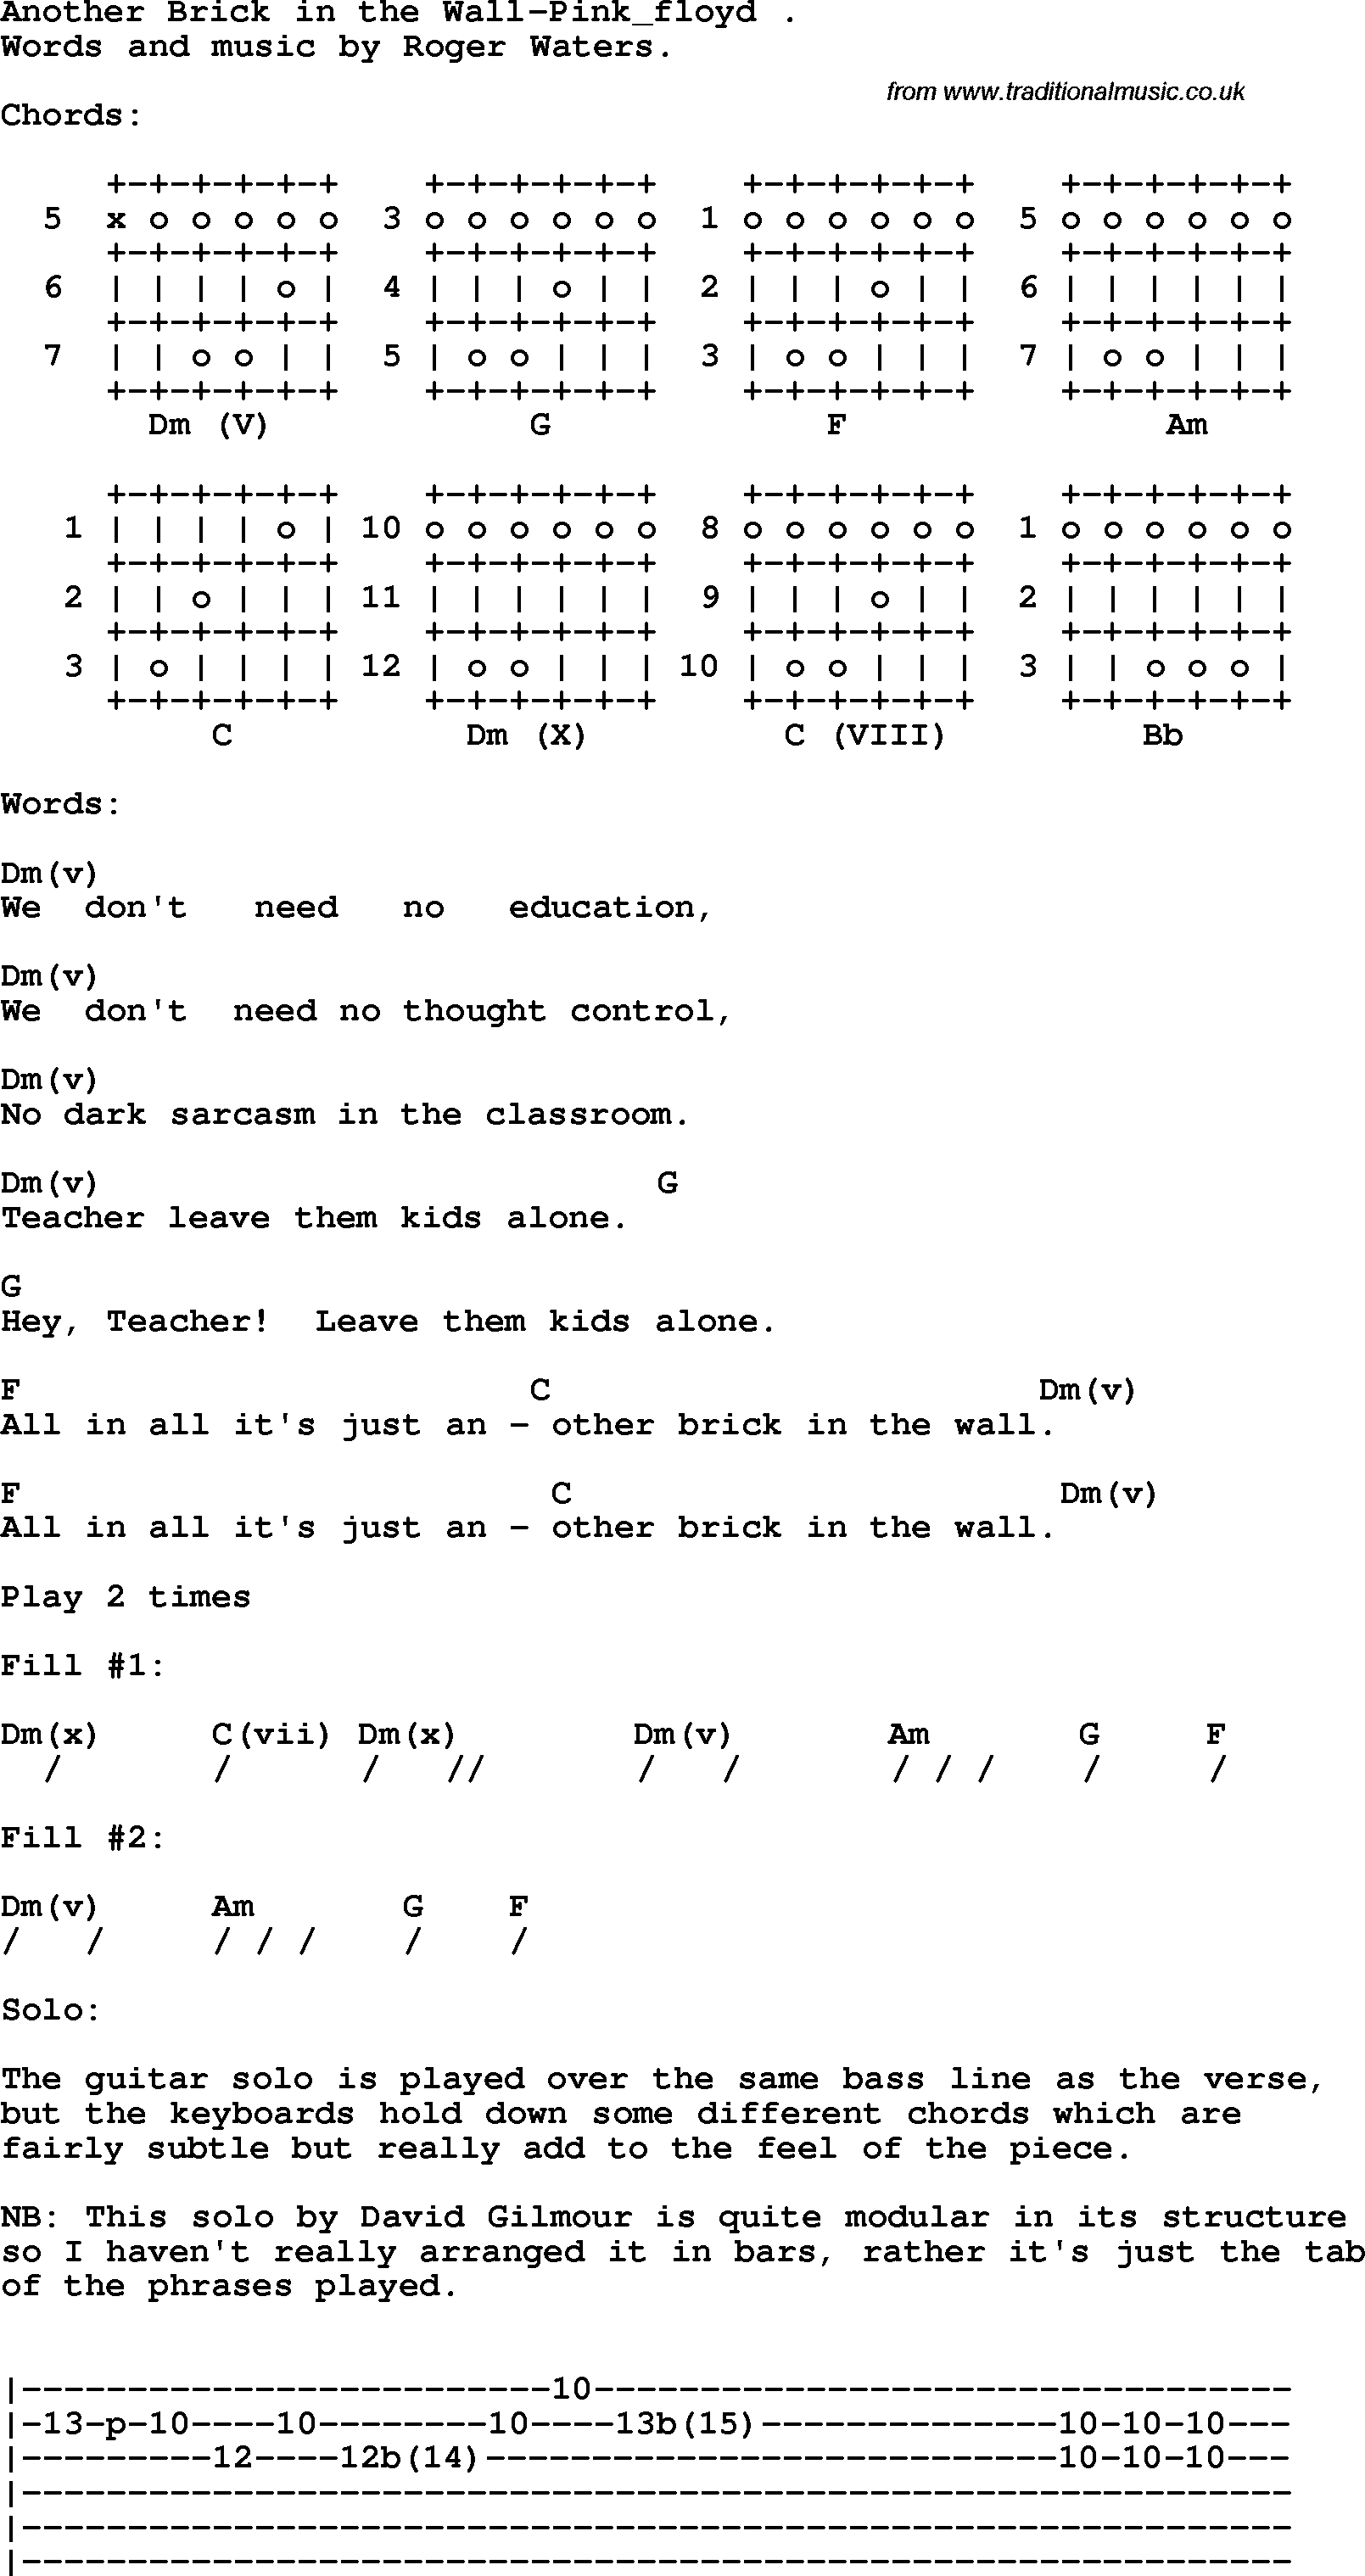 Protest Song Another Brick In The Wall-Pink Floyd lyrics and chords